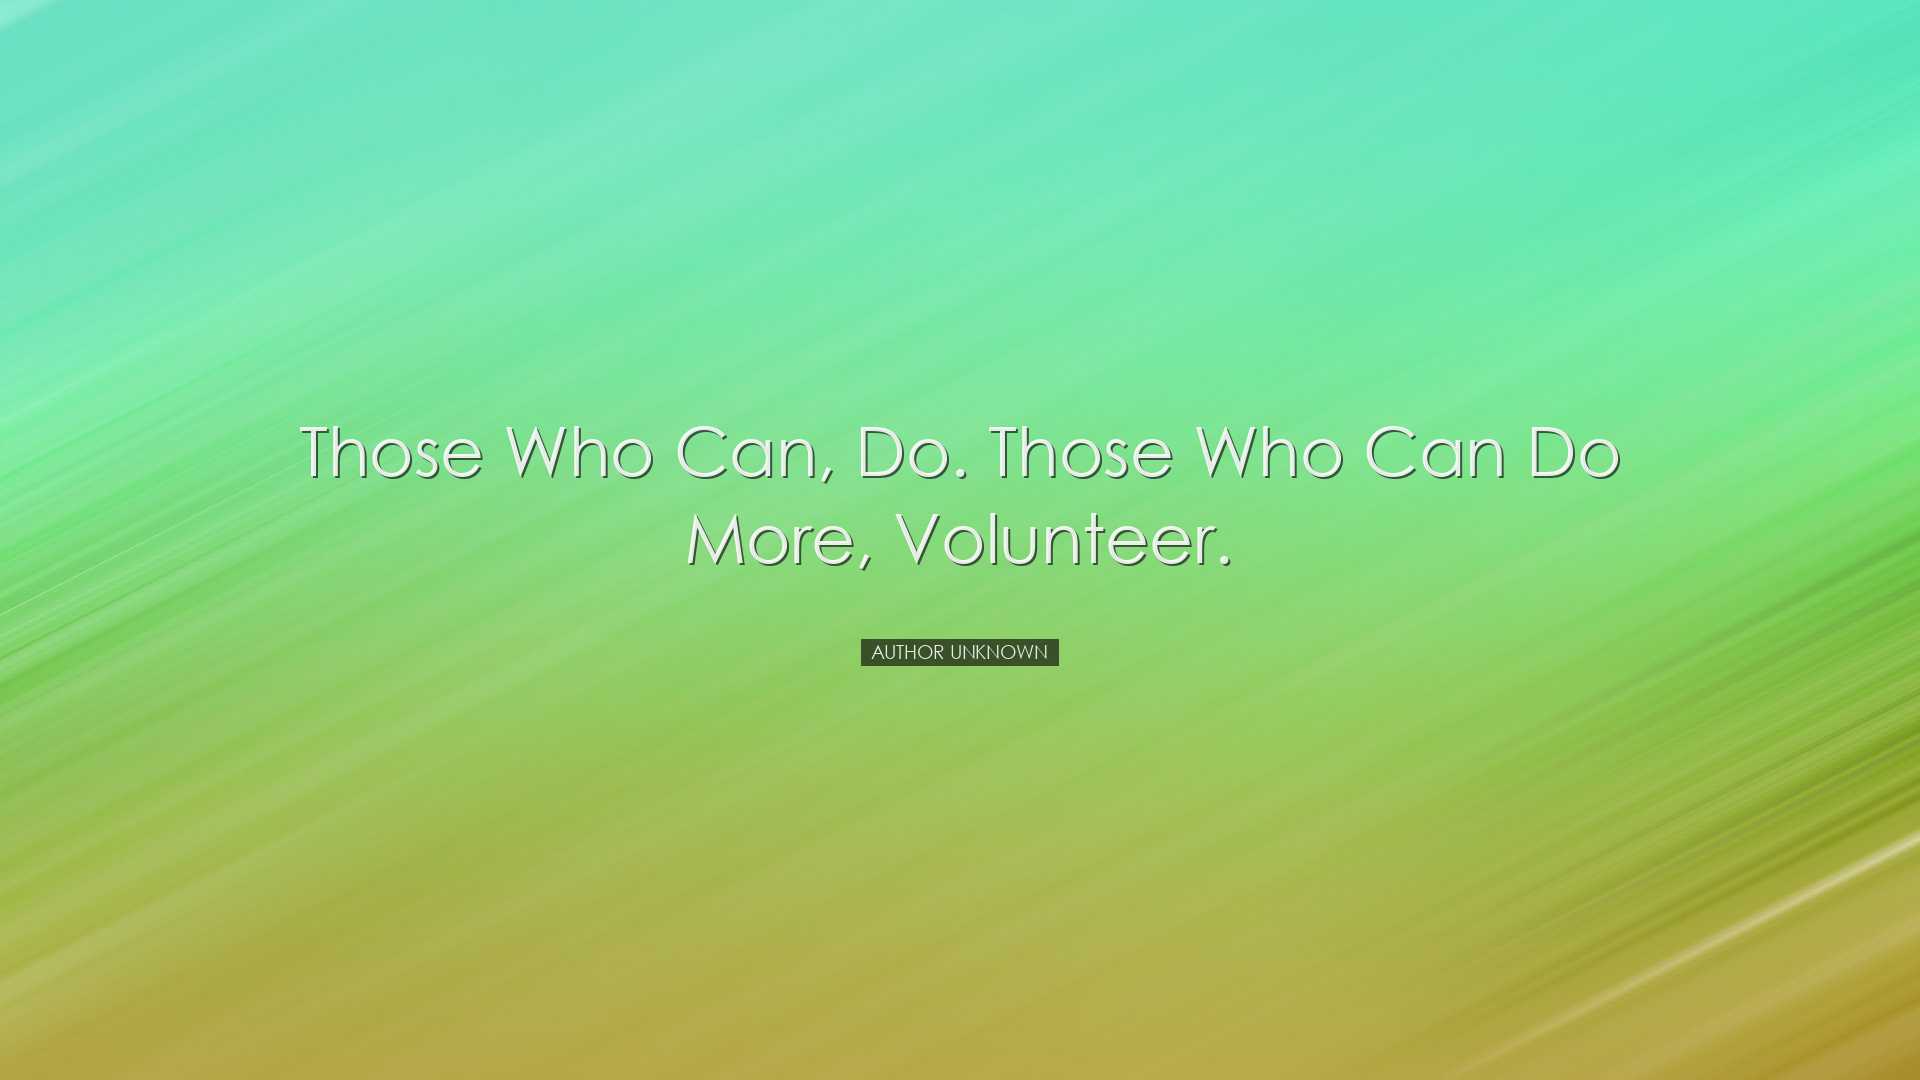 Those who can, do. Those who can do more, volunteer. - Author Unkn